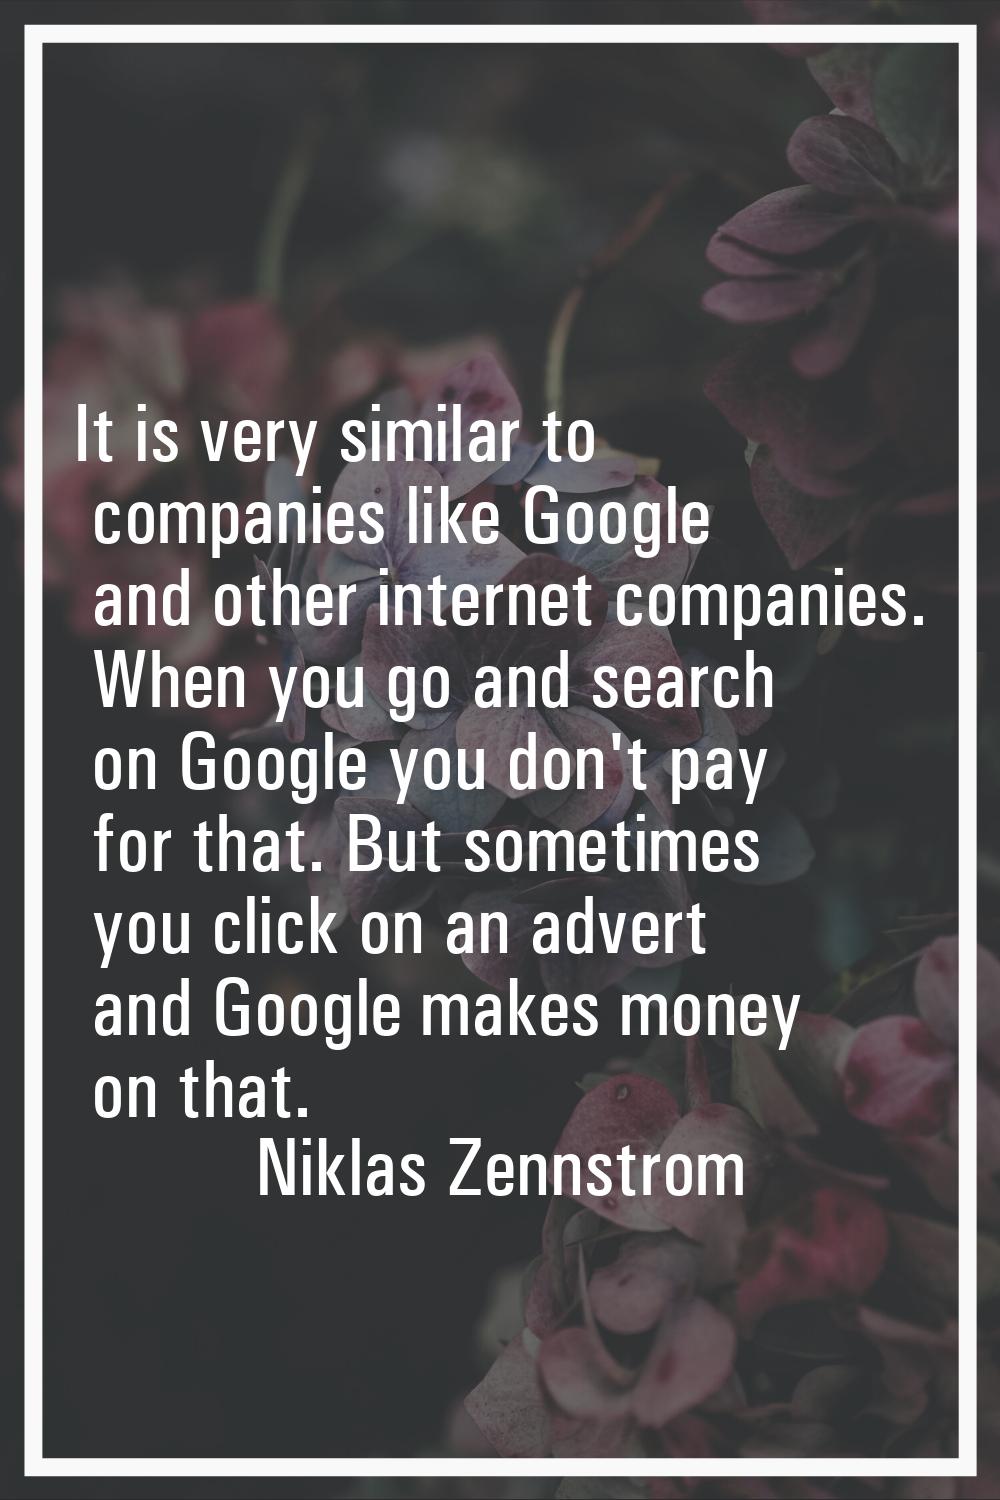 It is very similar to companies like Google and other internet companies. When you go and search on